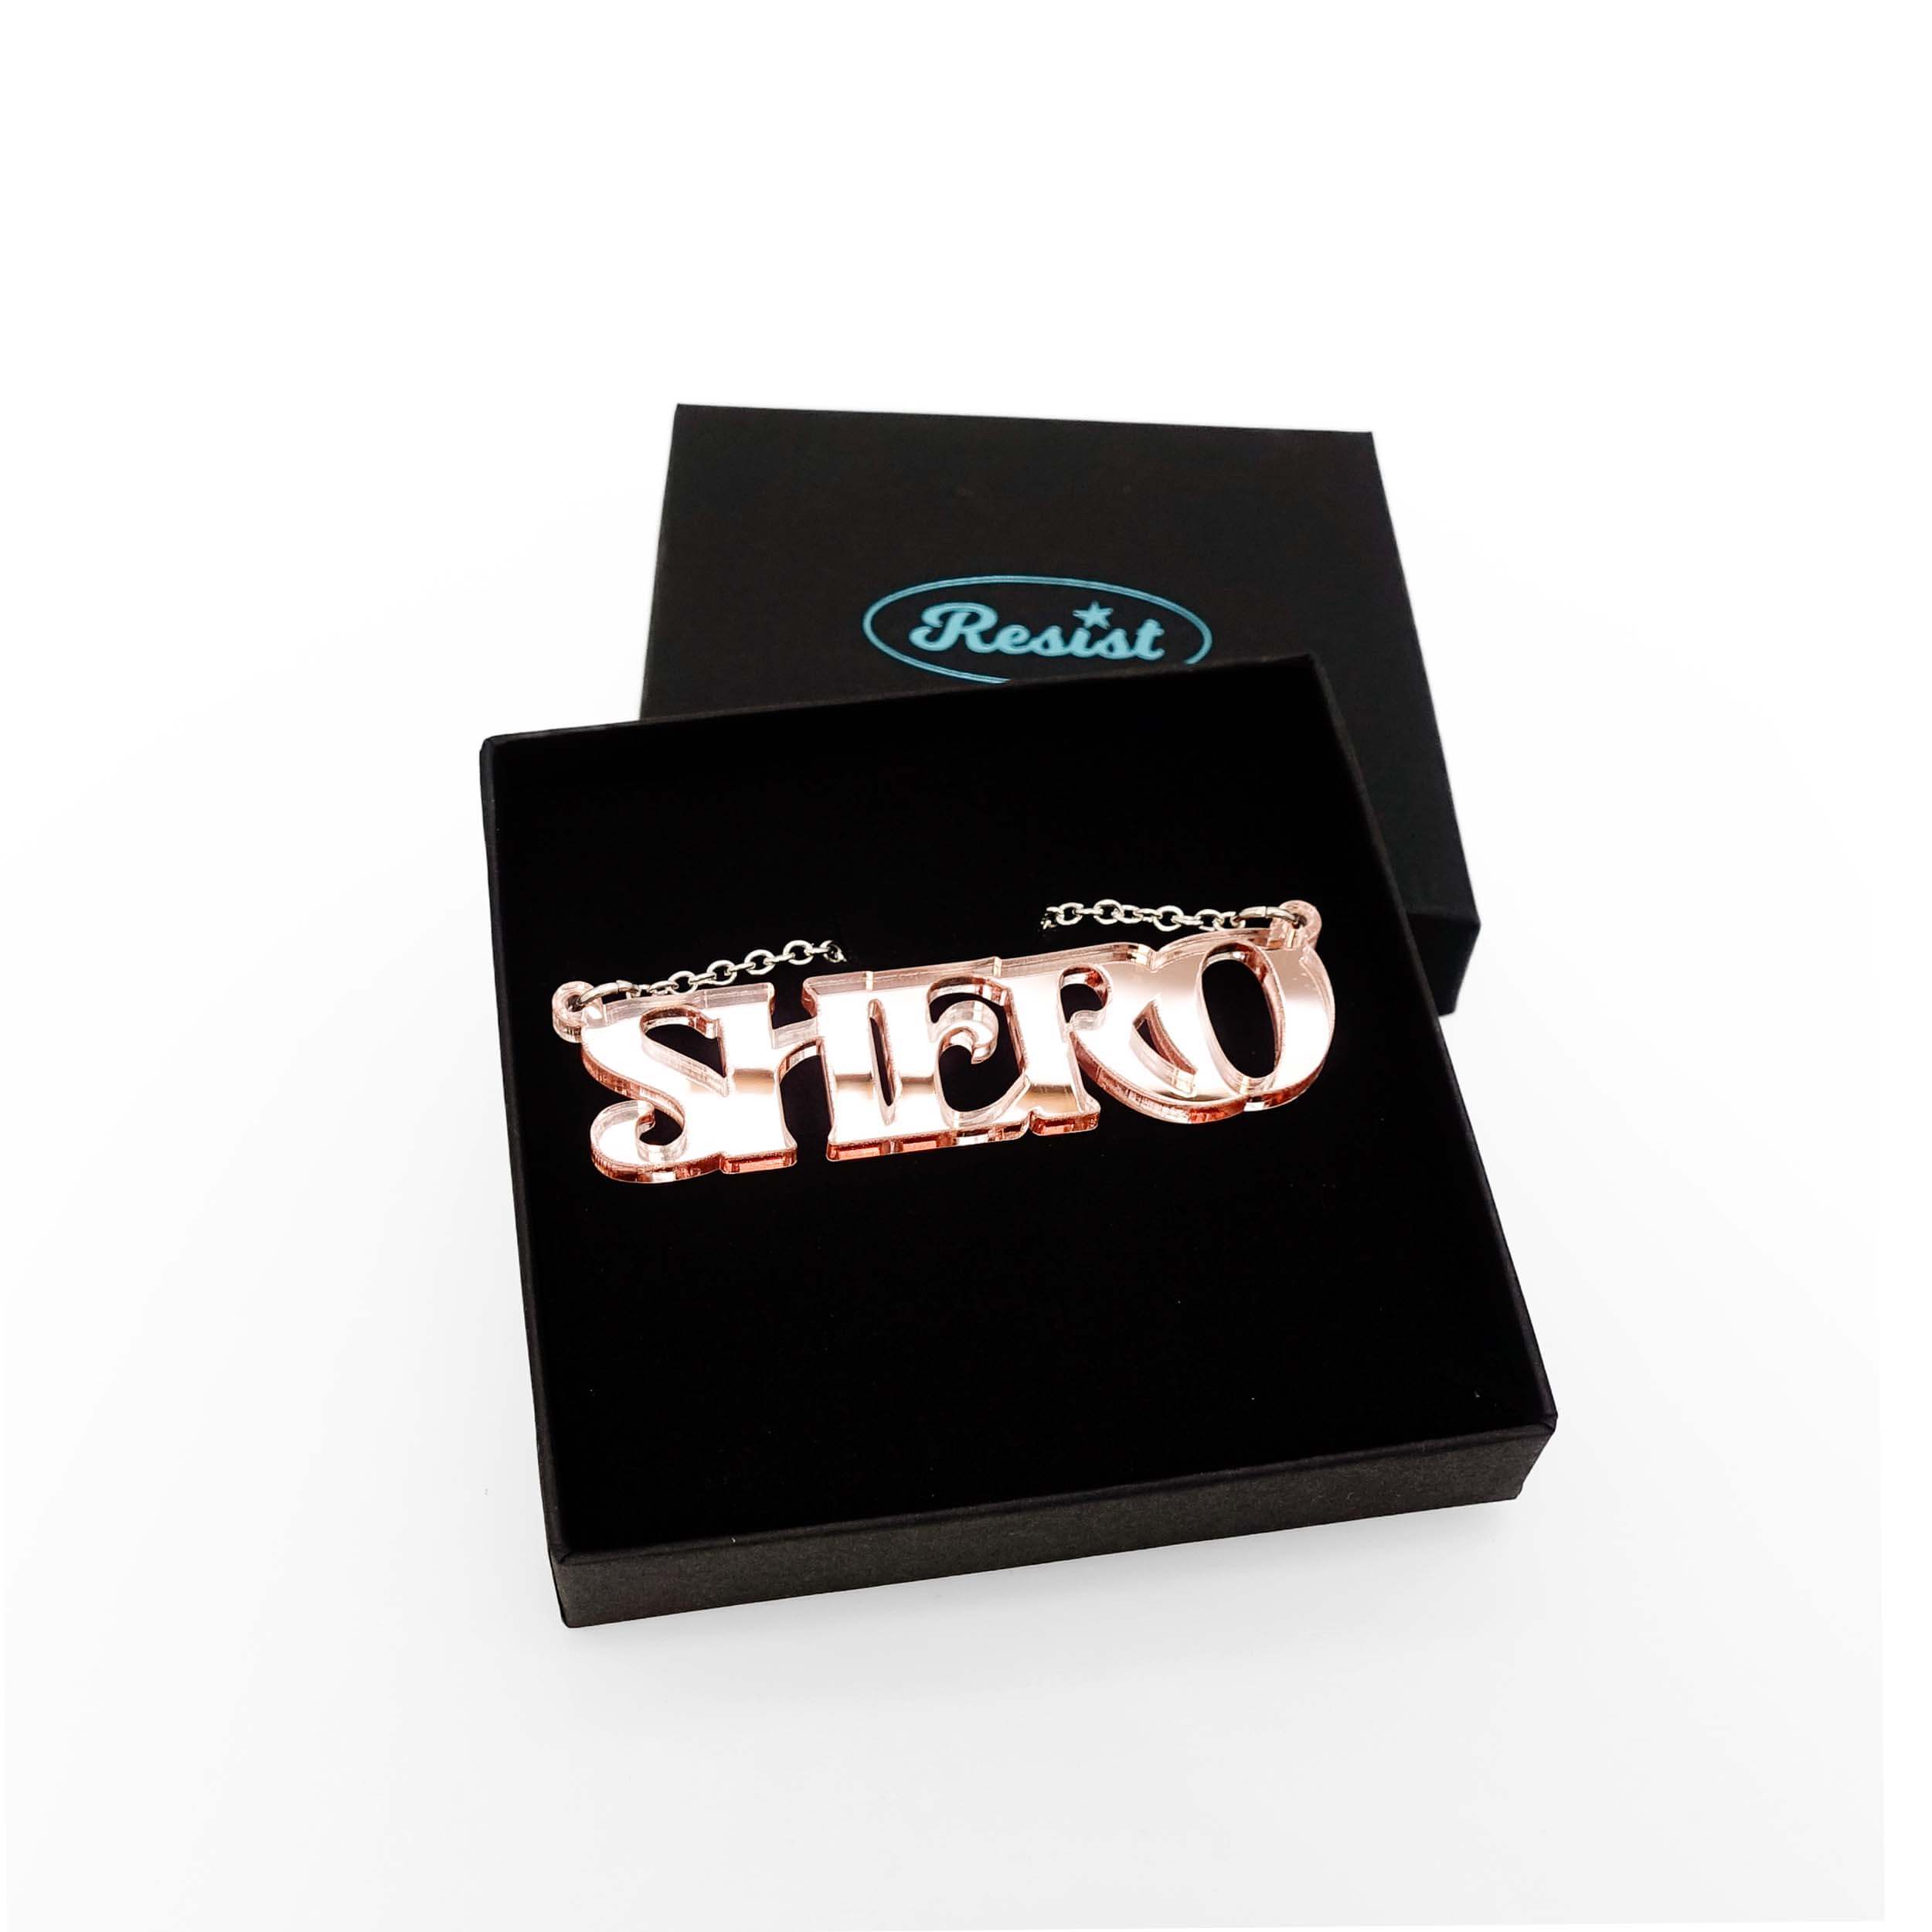 Rose gold mirror Shero necklace shown in a Wear and Resist gift box. 